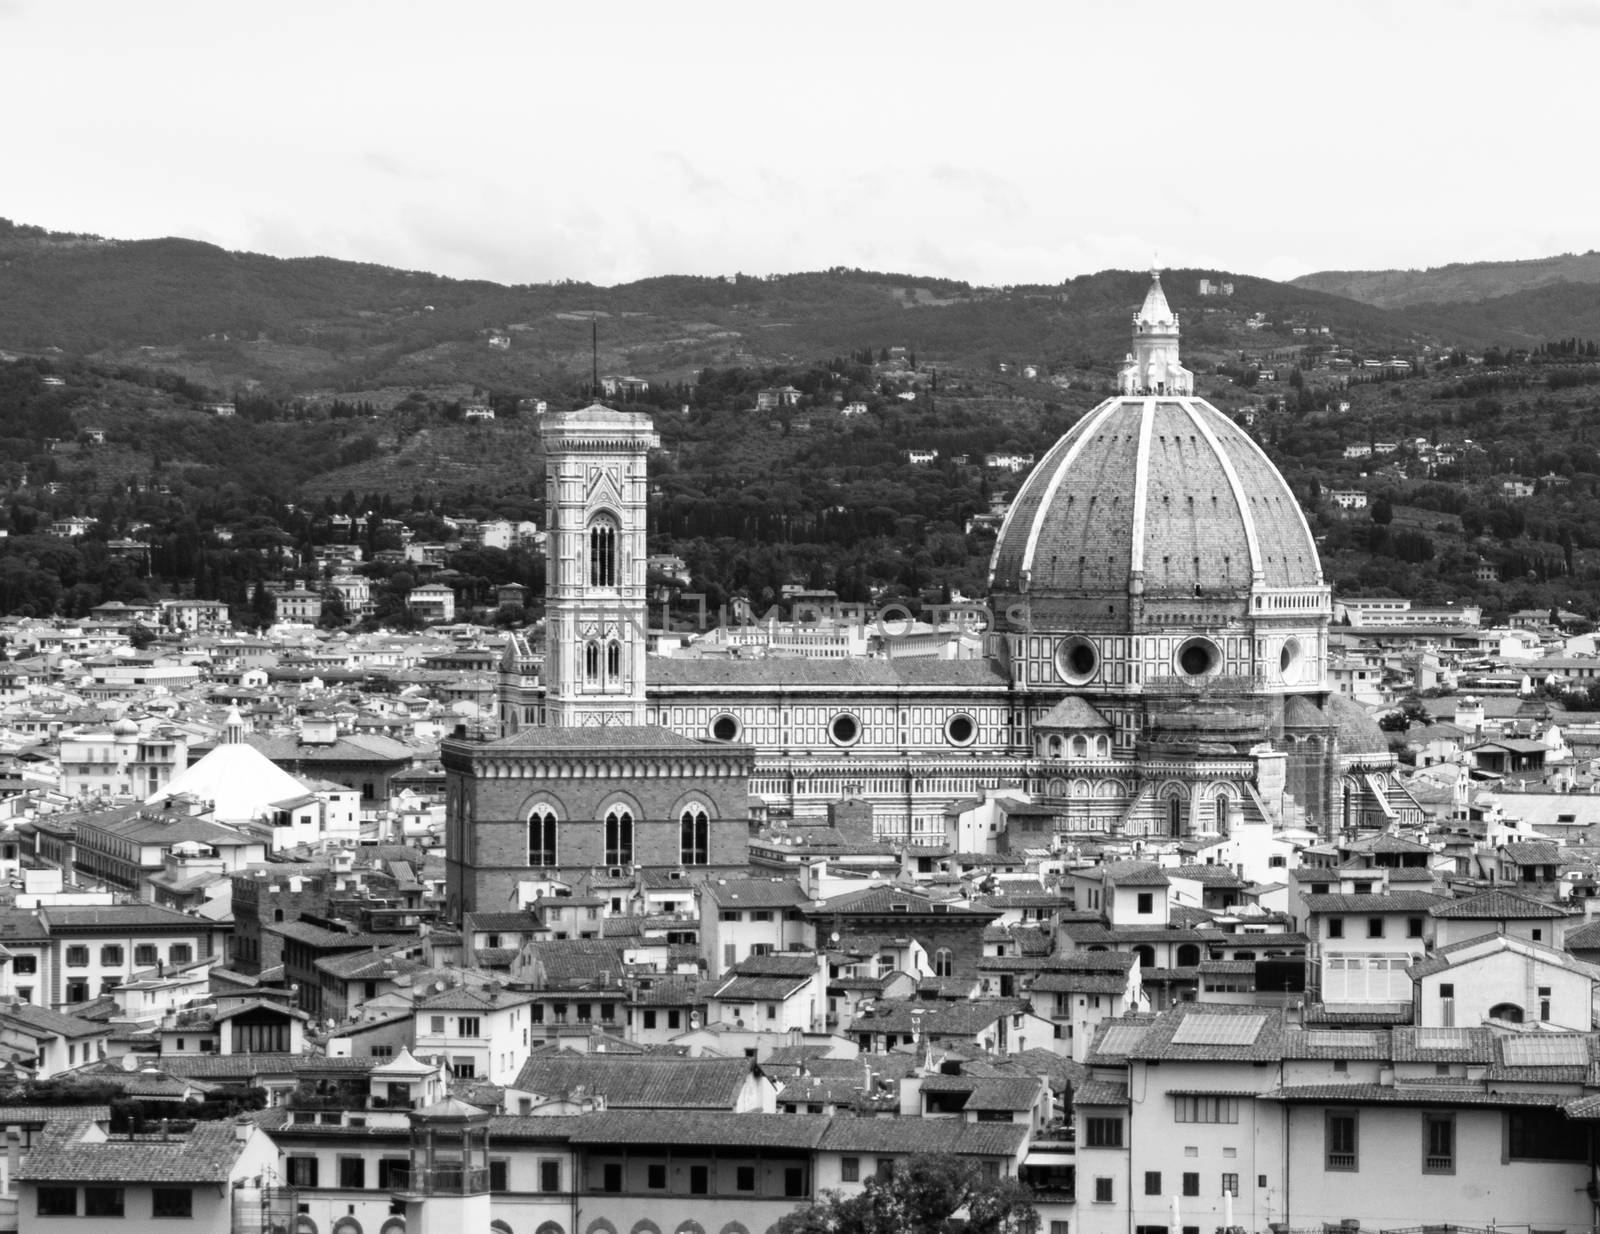 Duomo Santa Maria del Fiore and Bargello in Florence, aka Firenze, Tuscany, Italy. Aerial view of cathedral. Black and white image.